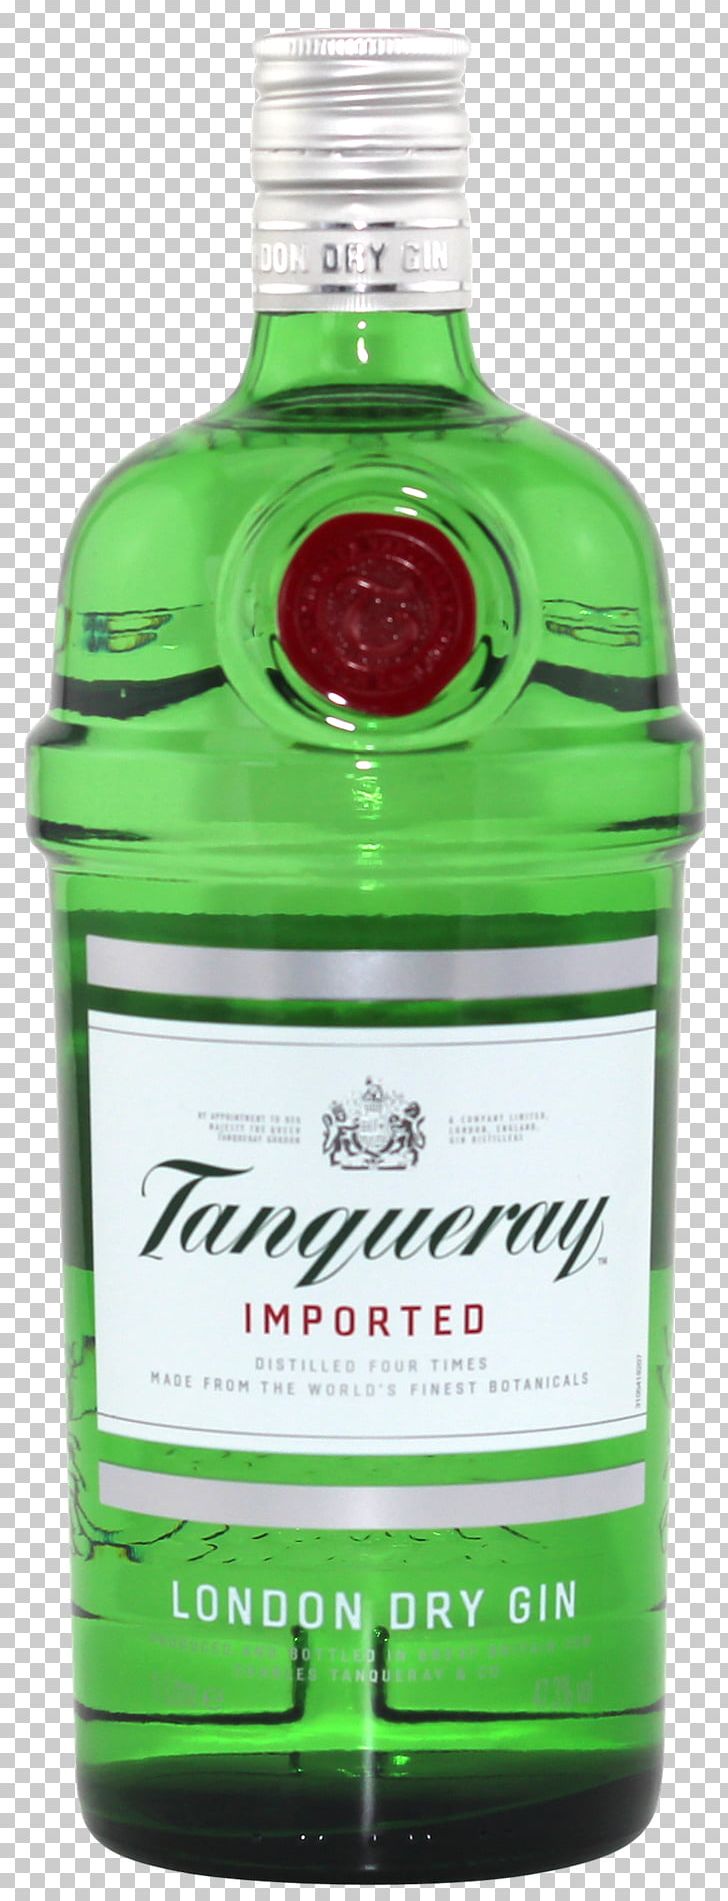 Liqueur Tanqueray Gin And Tonic Distilled Beverage PNG, Clipart, Aguardiente, Alcoholic Beverage, Alcoholic Drink, Bottle, Bottle Shop Free PNG Download